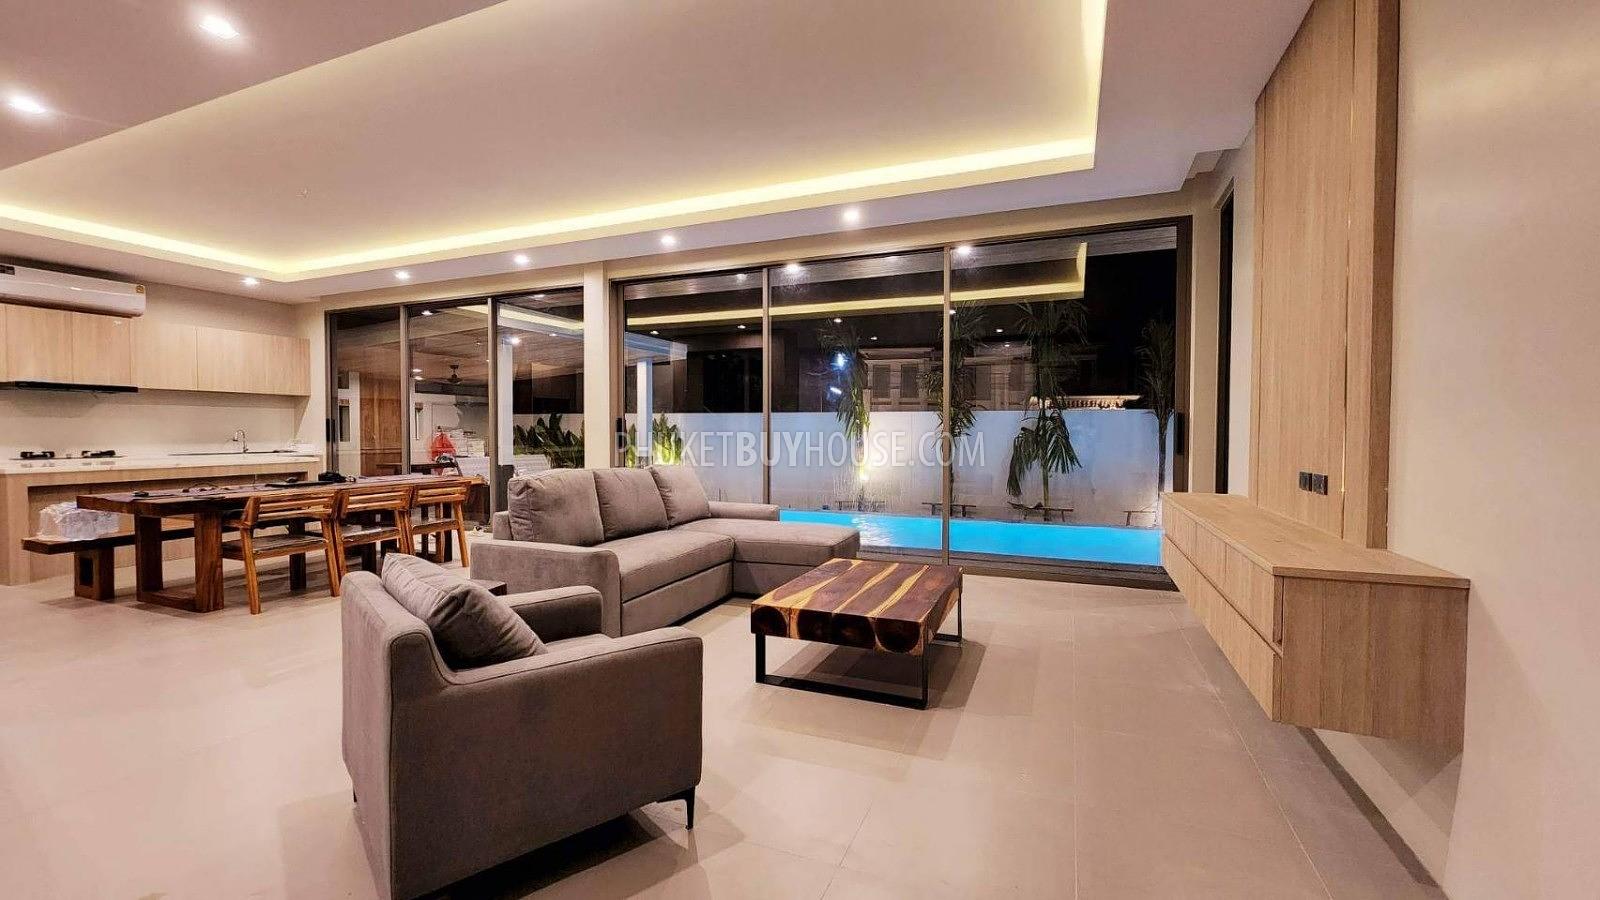 CHA22041: Modern Villa with 4 Bedrooms For Sale in Chalong. Photo #9